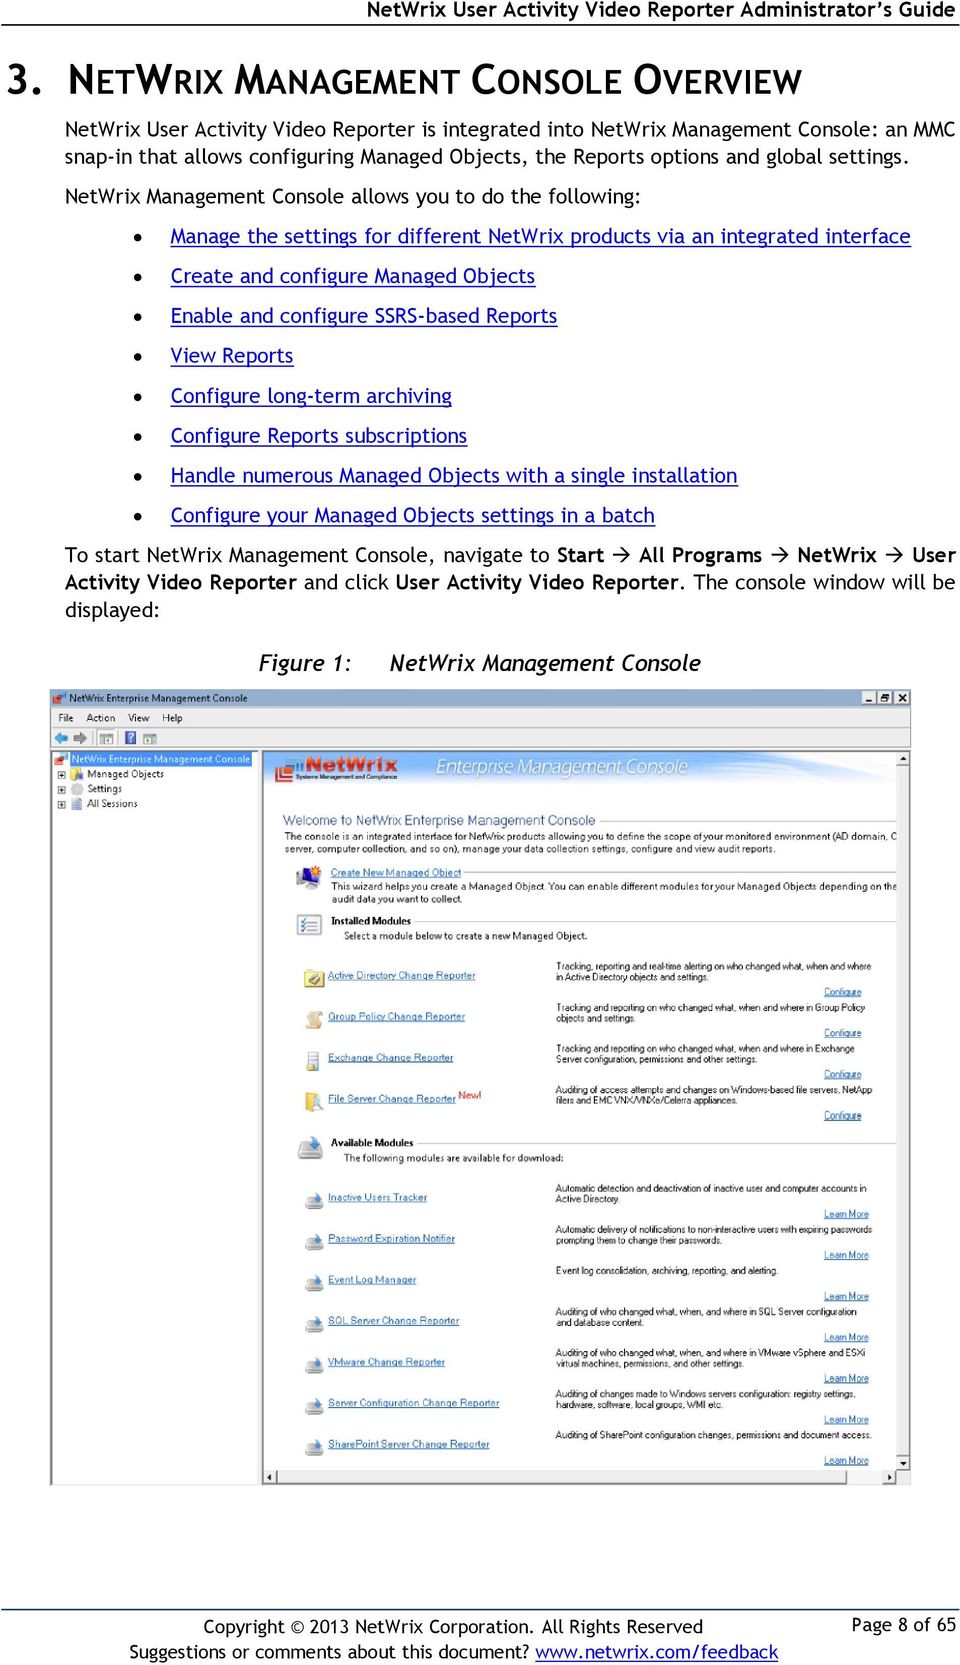 NetWrix Management Console allows you to do the following: Manage the settings for different NetWrix products via an integrated interface Create and configure Managed Objects Enable and configure